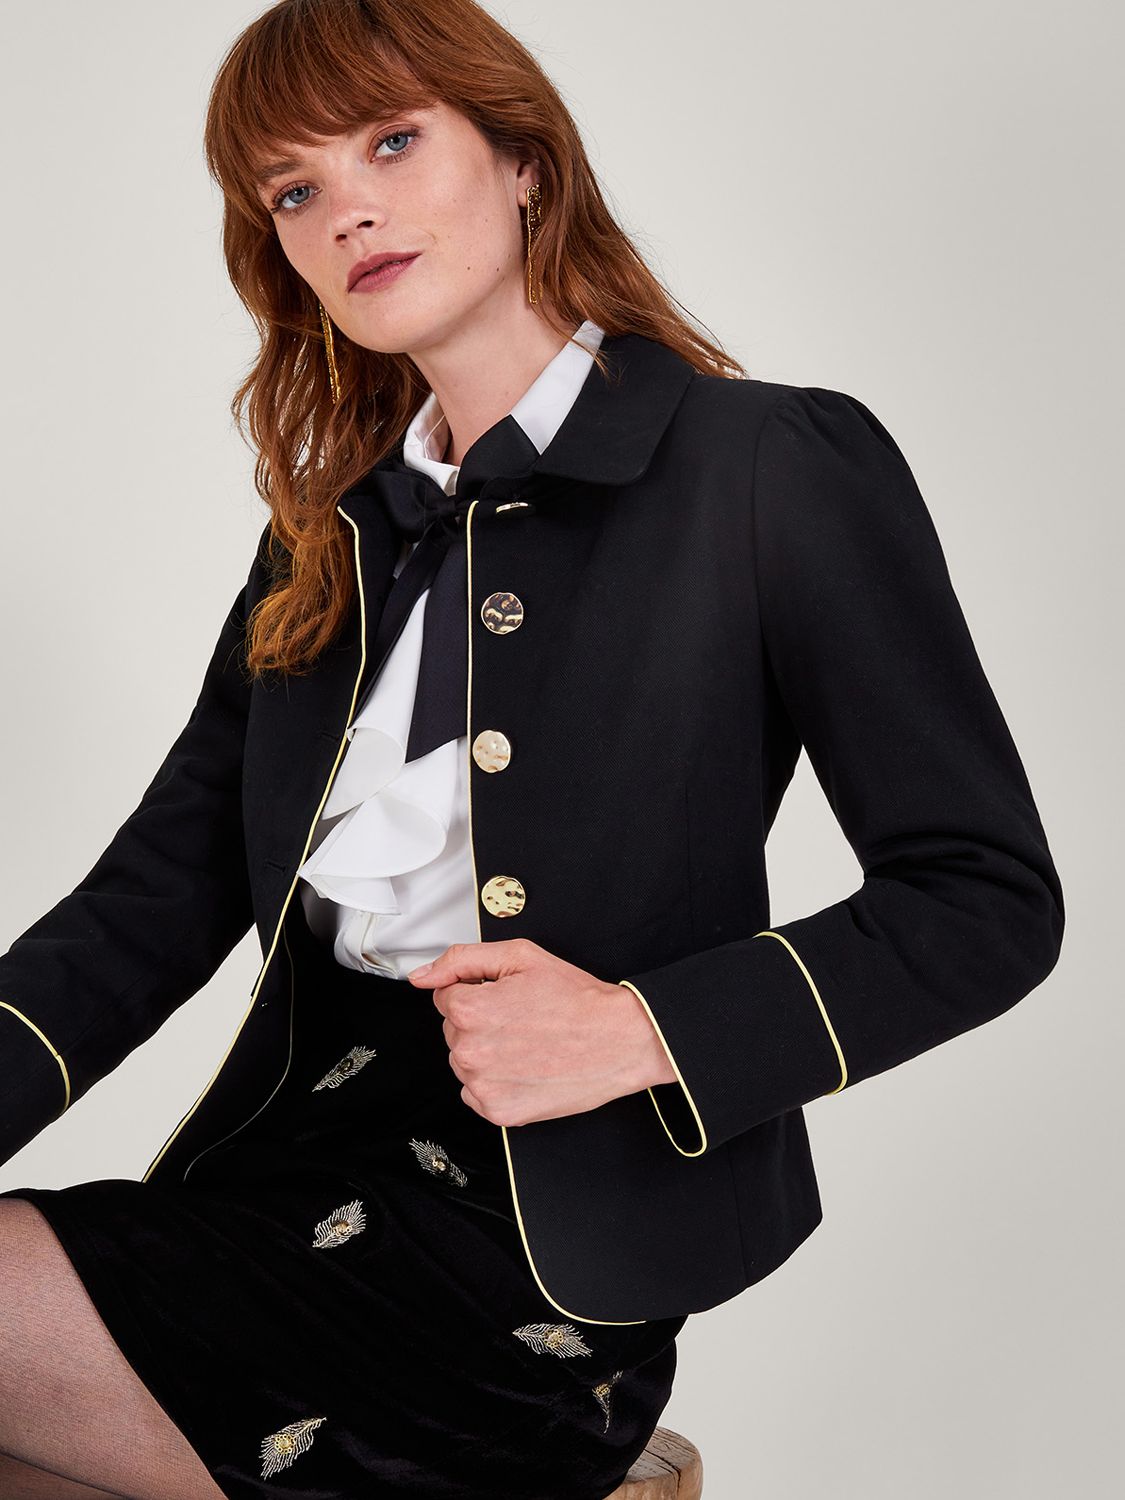 Buy Monsoon Collared Gold Button Piping Detail Jacket, Black Online at johnlewis.com